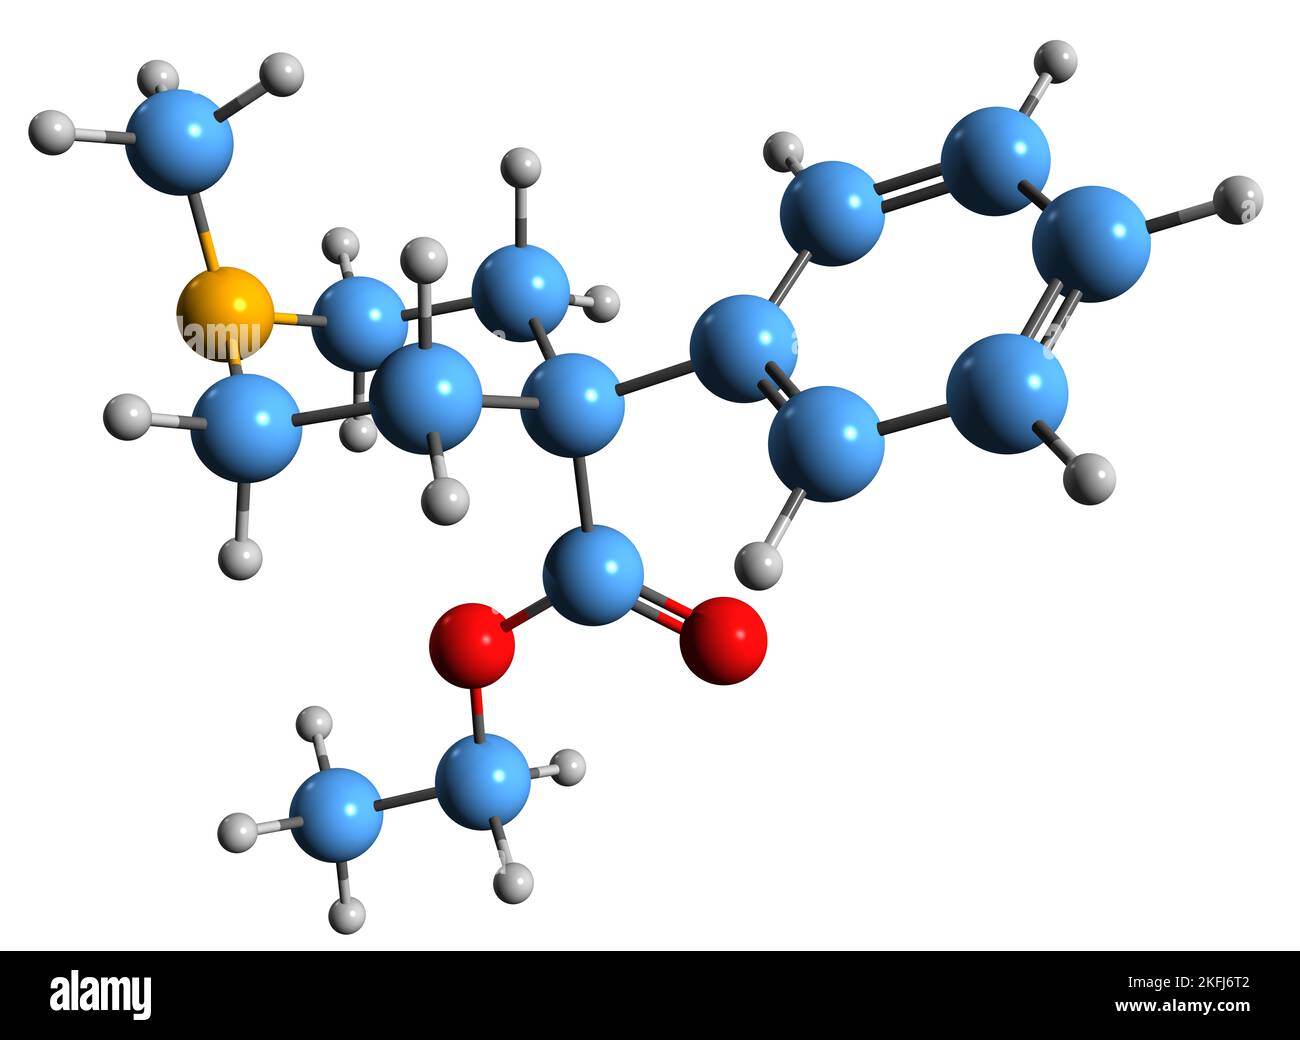 3D image of Pethidine skeletal formula - molecular chemical structure of opioid pain medication meperidine isolated on white background Stock Photo